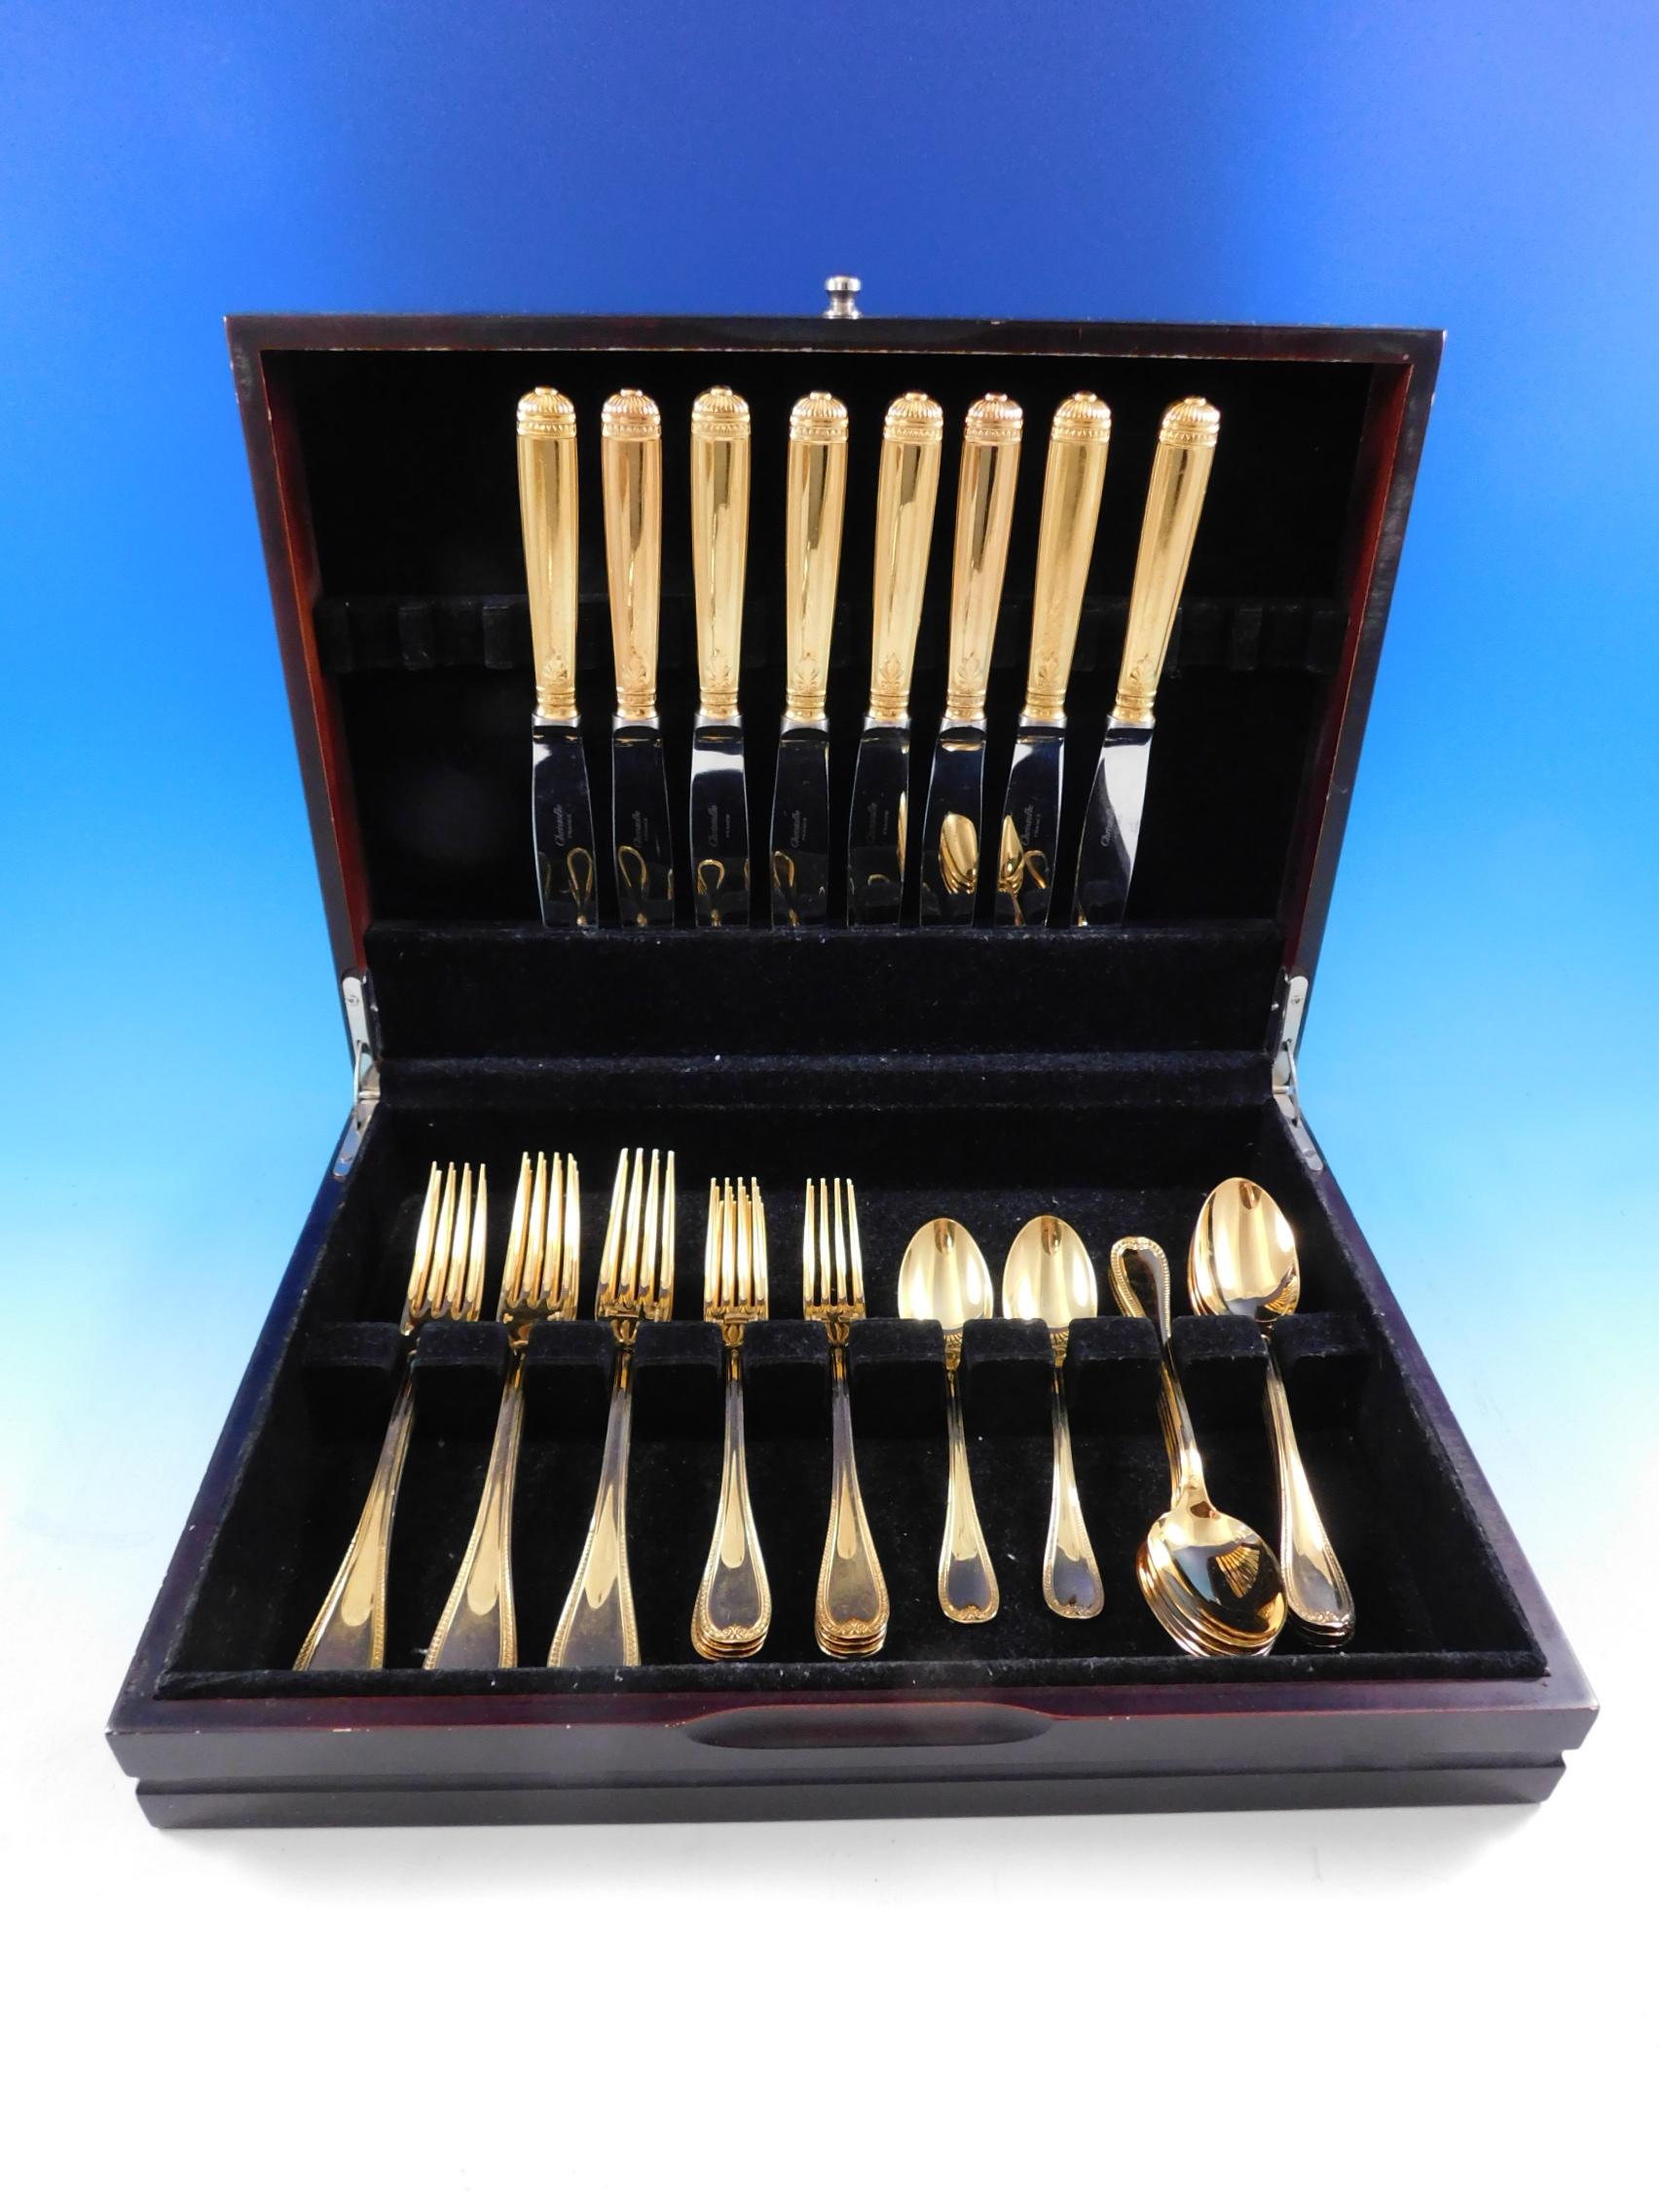 Gorgeous dinner size Malmaison by Christofle Silverplate Gilded (completely gold-washed) Flatware set - 40 pieces. This set includes:

8 dinner knives, 9 5/8